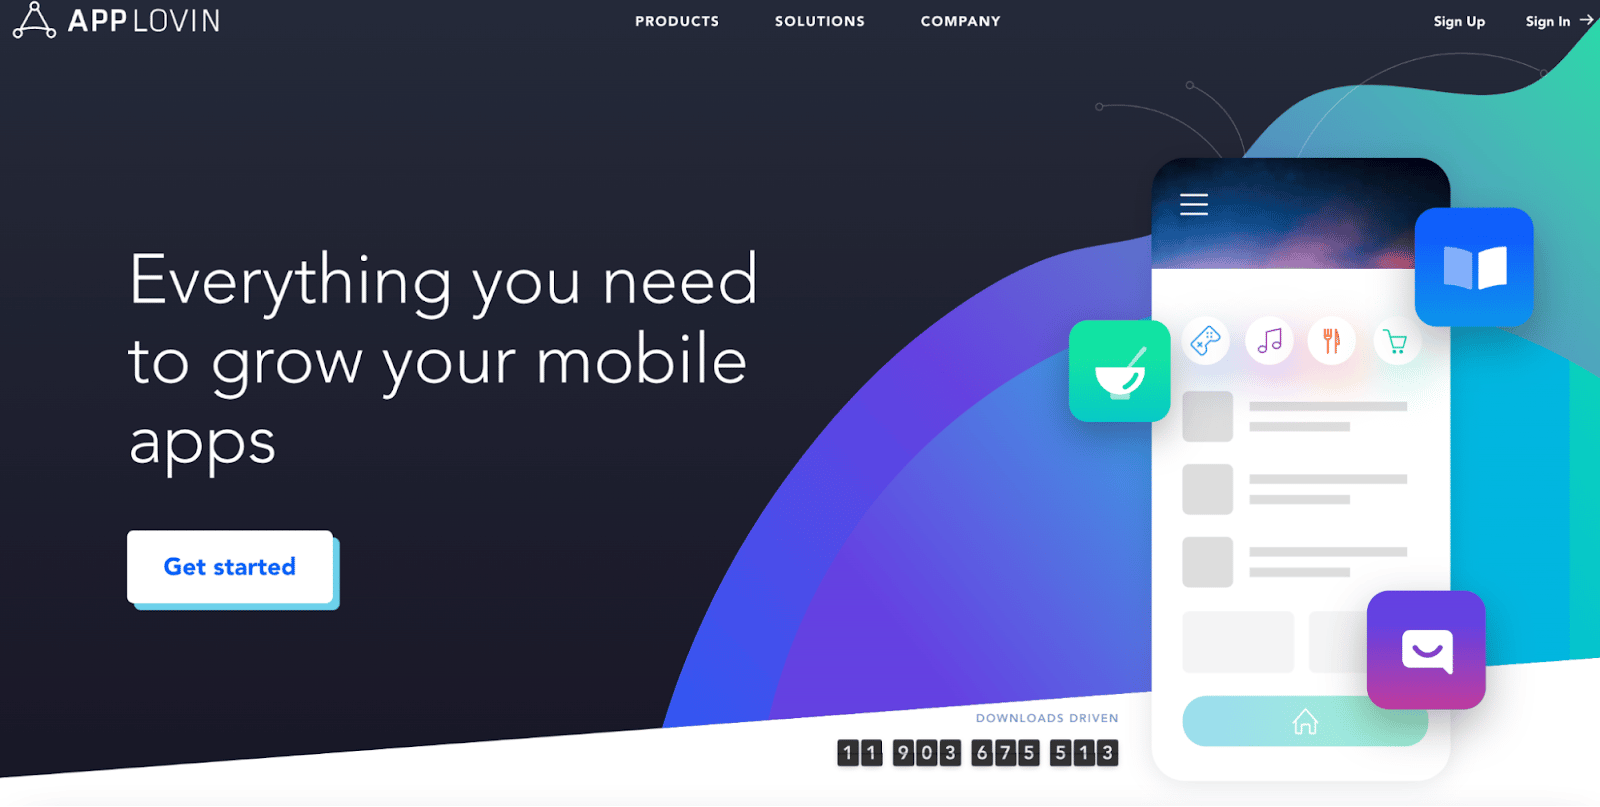 The homepage for AppLovin